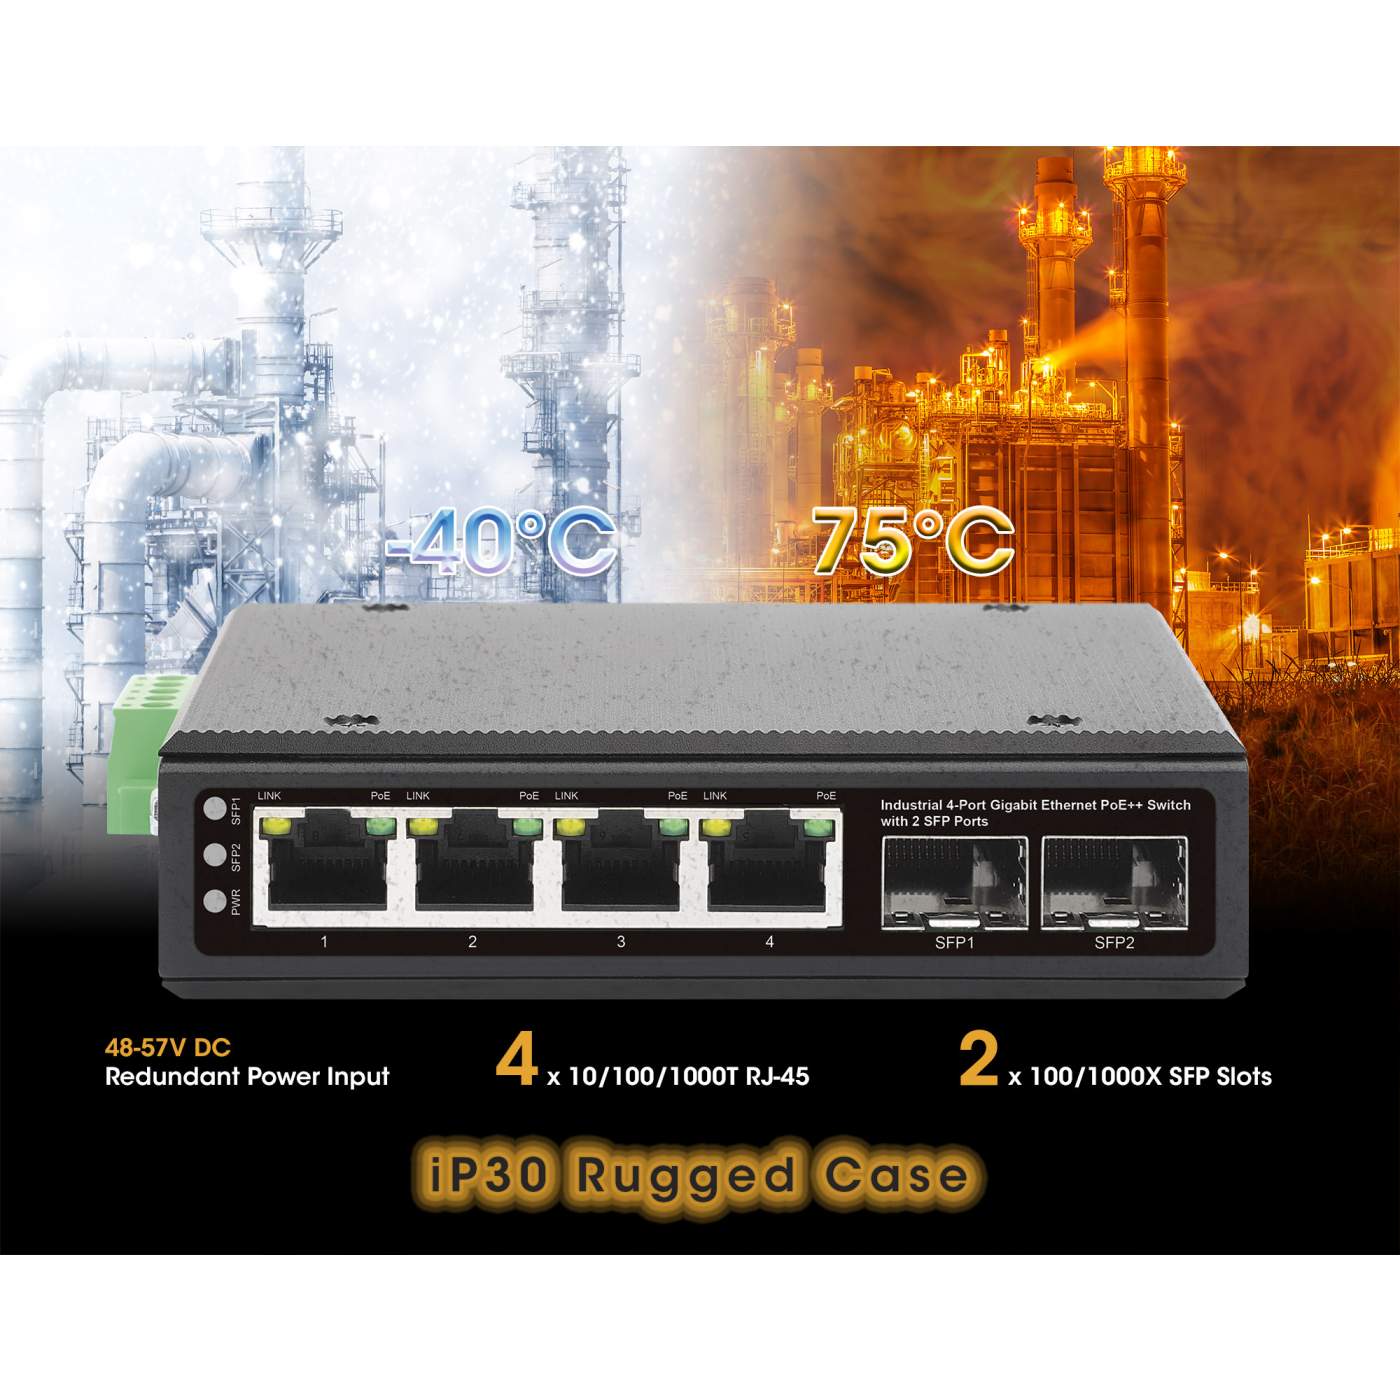 FASTCABLING PoE Passthrough Switch 4 Port, VLAN, QoS, Expand Network Port  with Existed Cat5e/Cat6 Cable, Managed 60W PoE Powered Switch